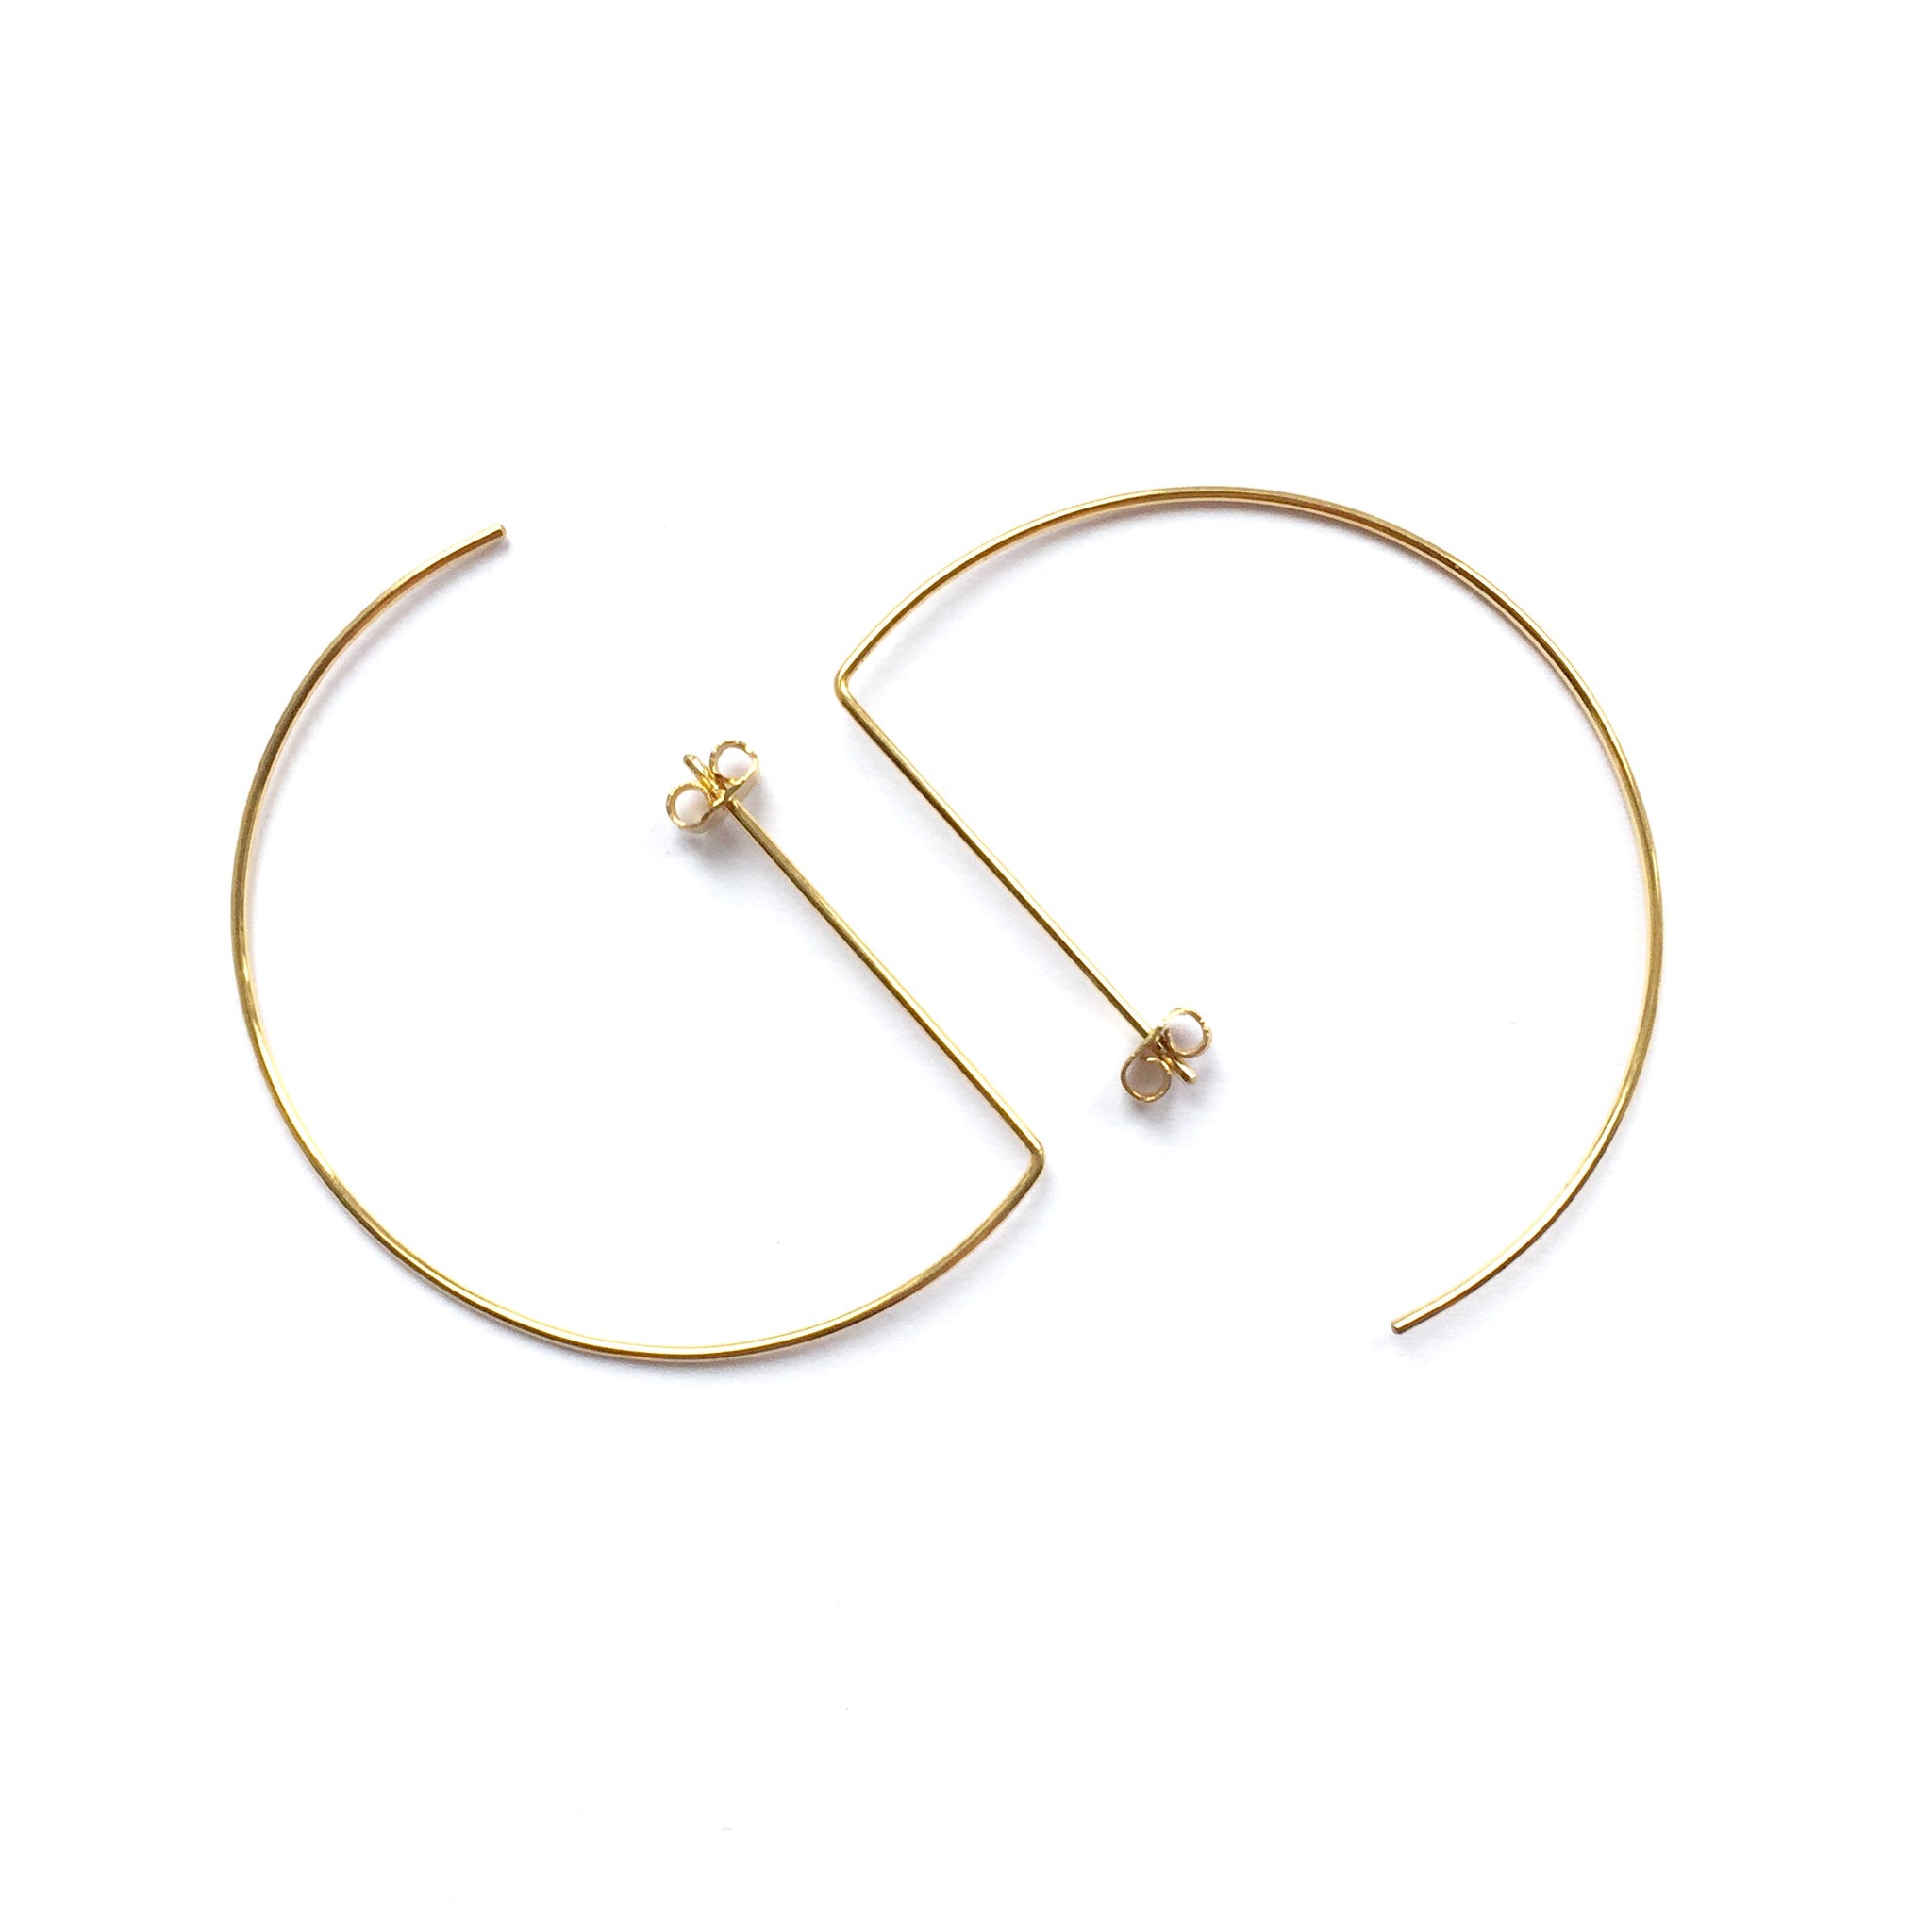 Bended Pin - Plateaux Jewellery